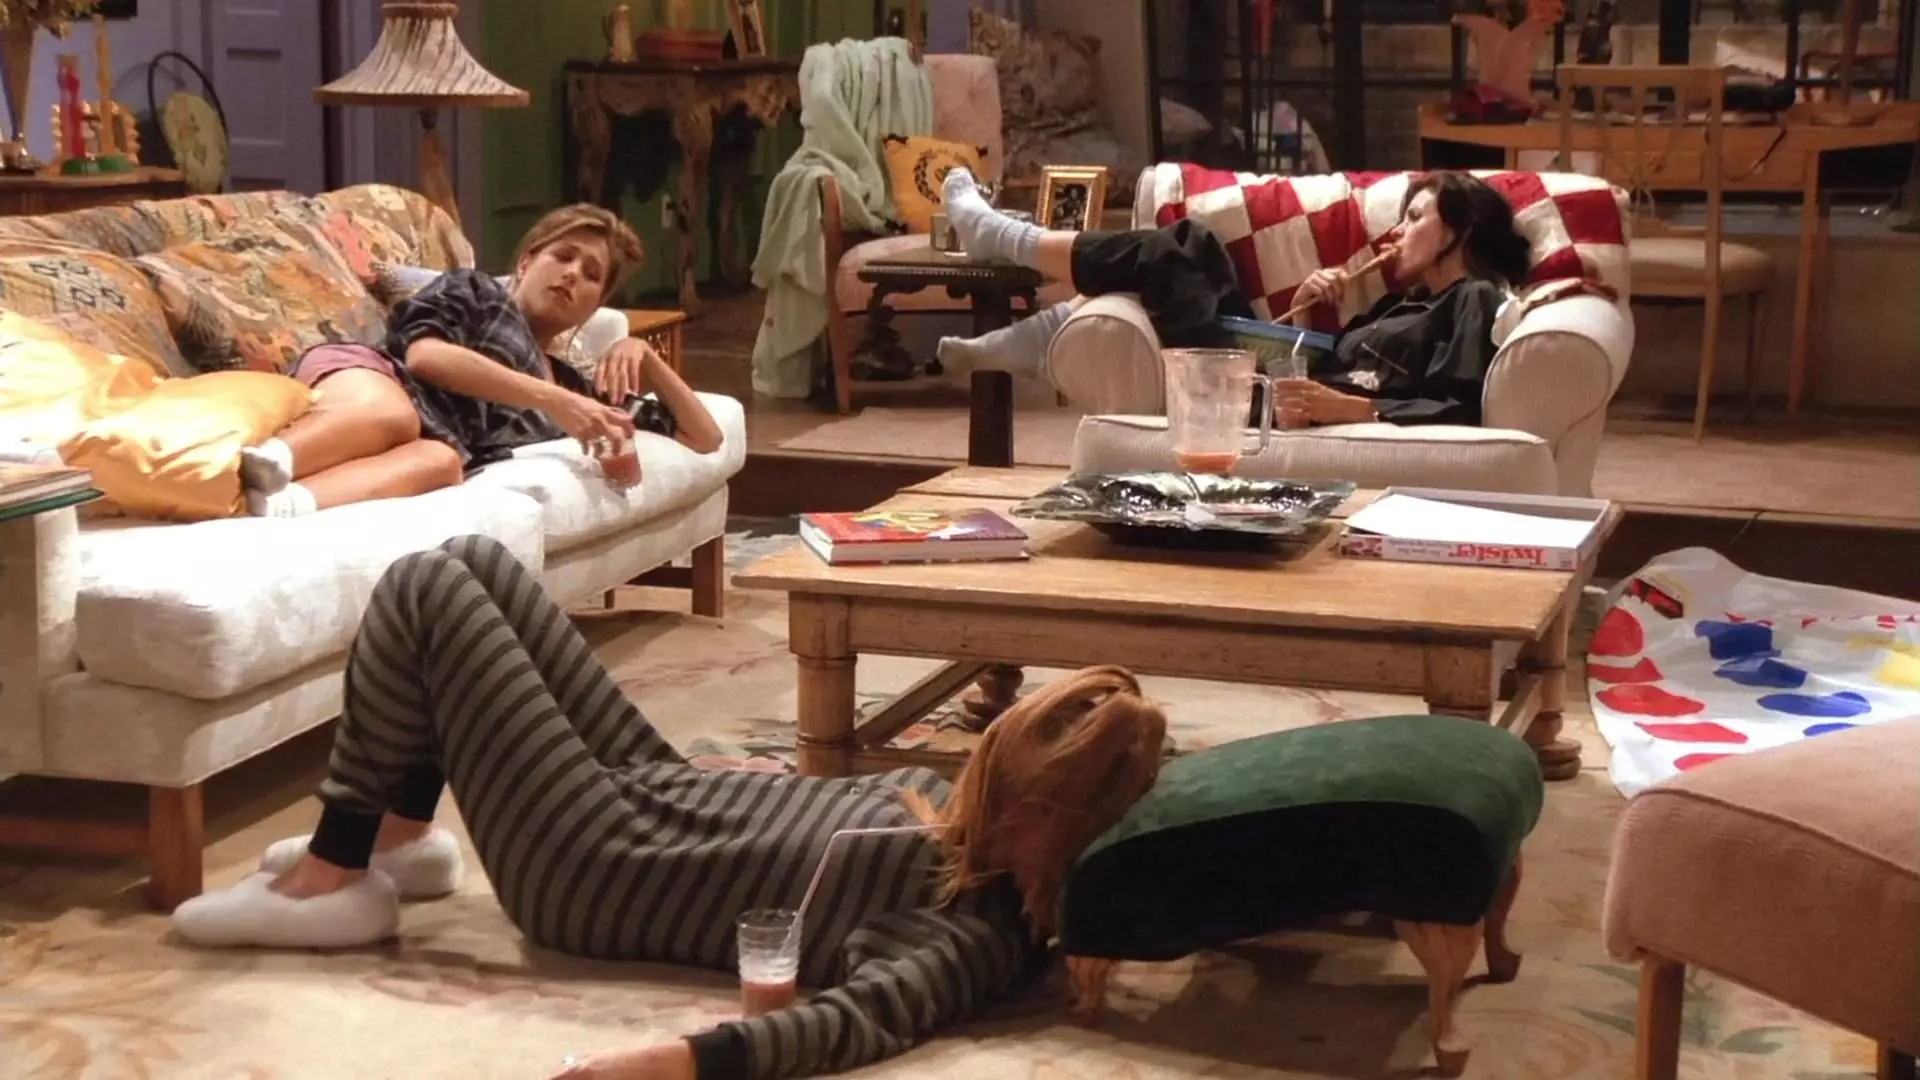 We're ready to snuggle up for a 'Friends' themed sleepover (